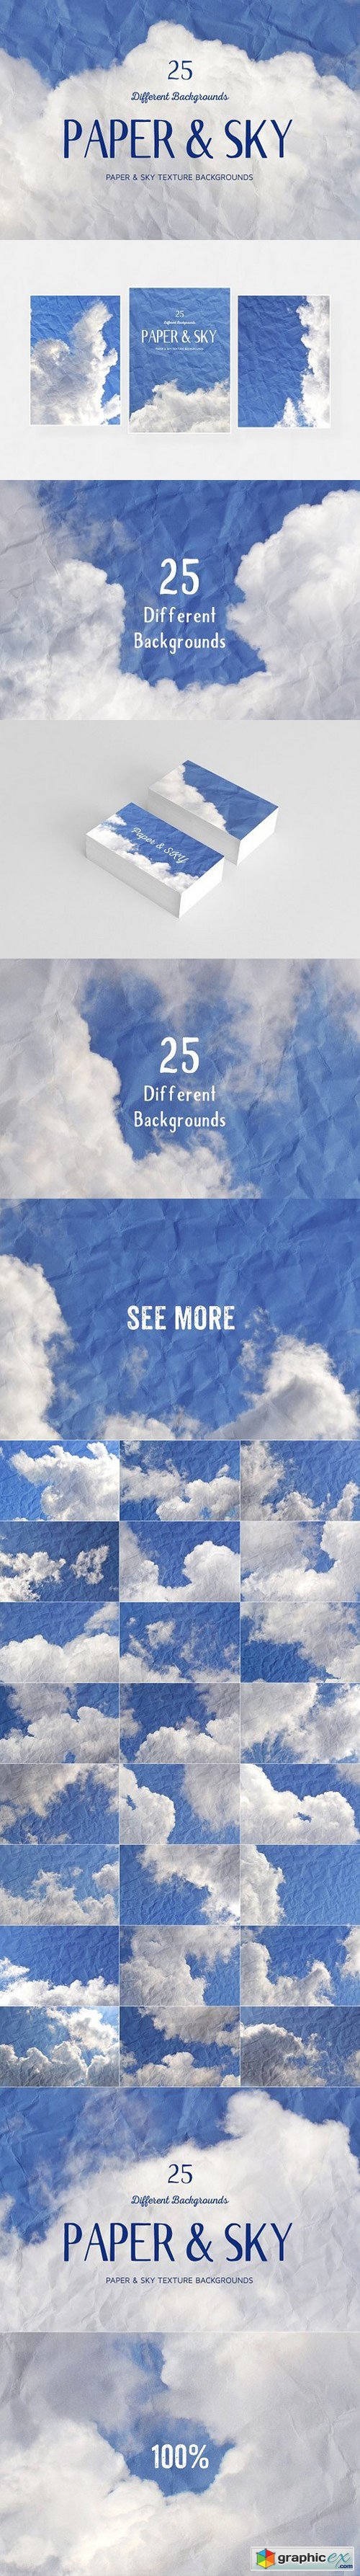 25 Paper & SKY Backgrounds